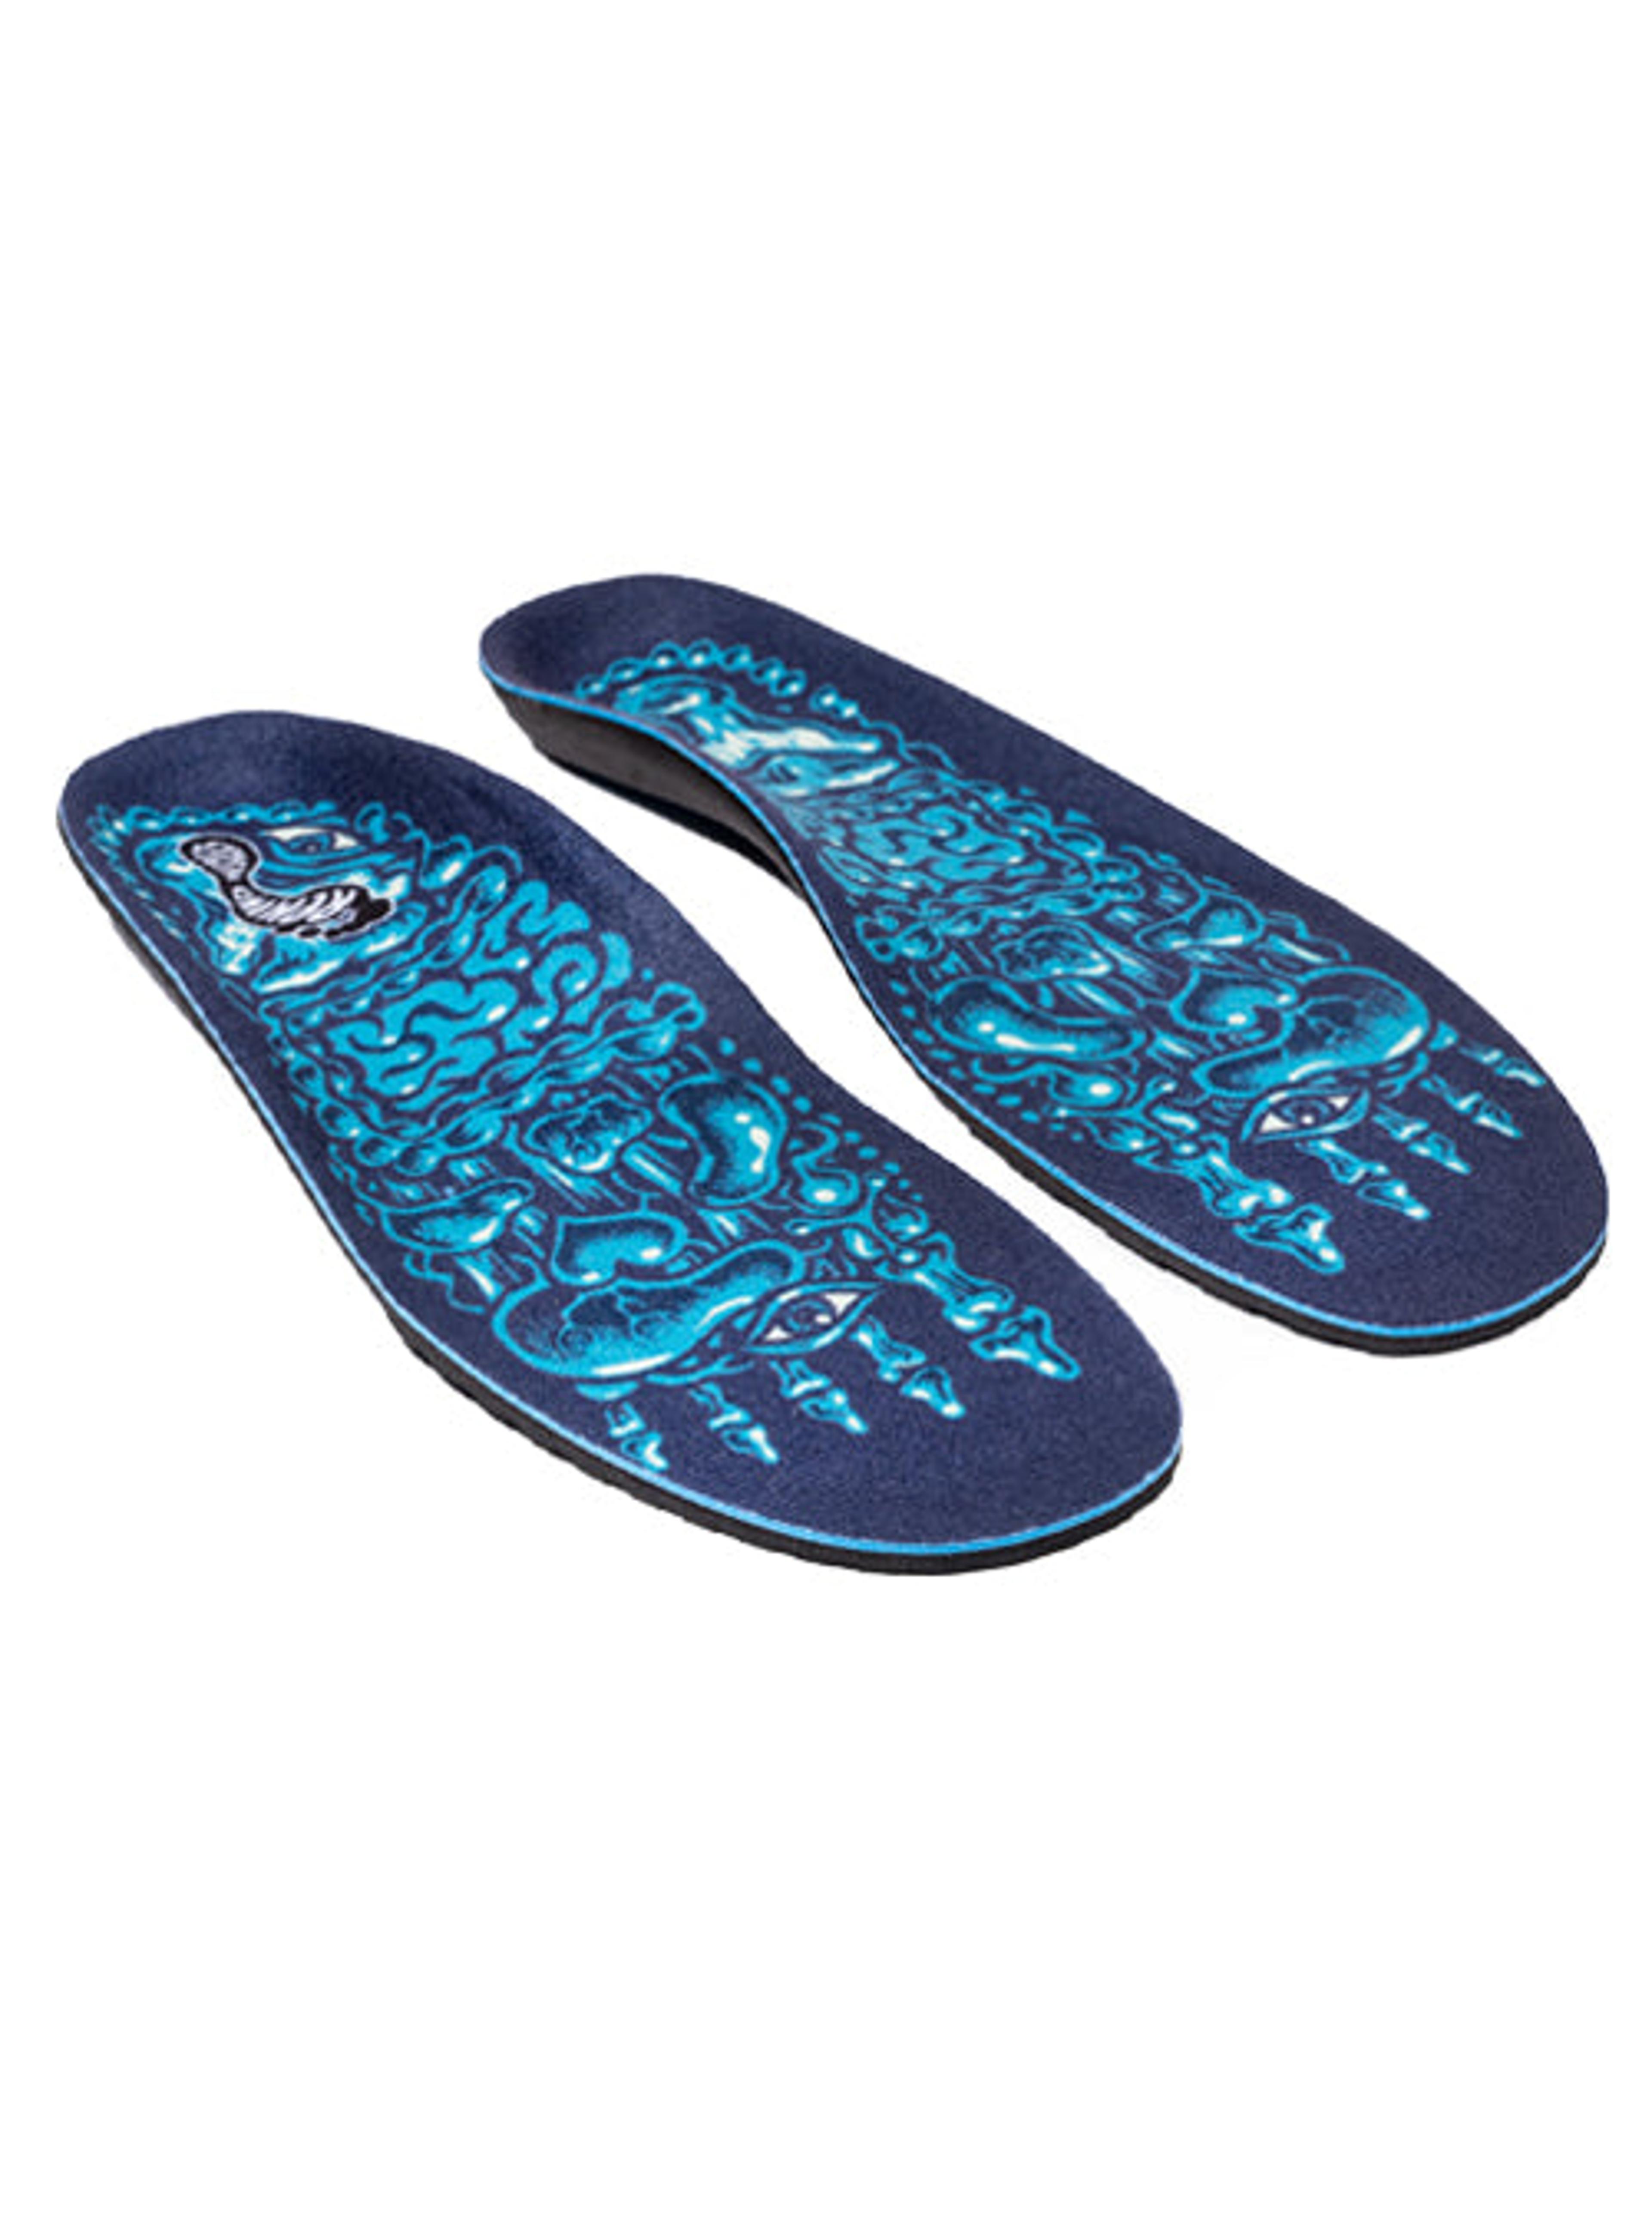 Alternate View 3 of MEDIC CLASSIC 5MM Mid-High Arch | Reflexology Insoles